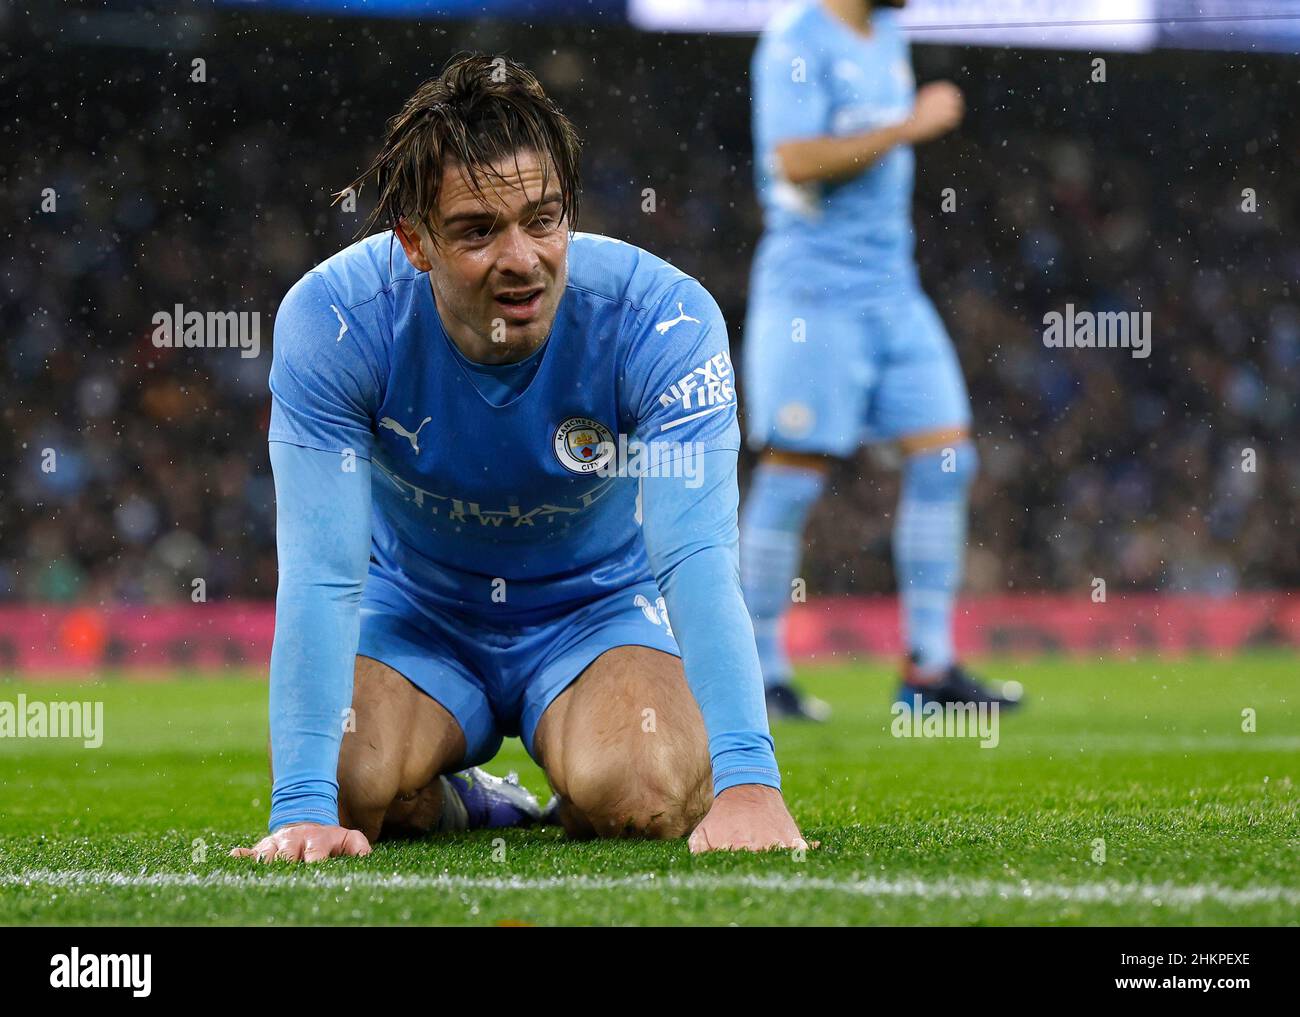 Soccer Football - FA Cup - Fourth Round - Manchester City v Fulham - Etihad Stadium, Manchester, Britain - February 5, 2022 Manchester City's Jack Grealish reacts Action Images via Reuters/Jason Cairnduff Stock Photo